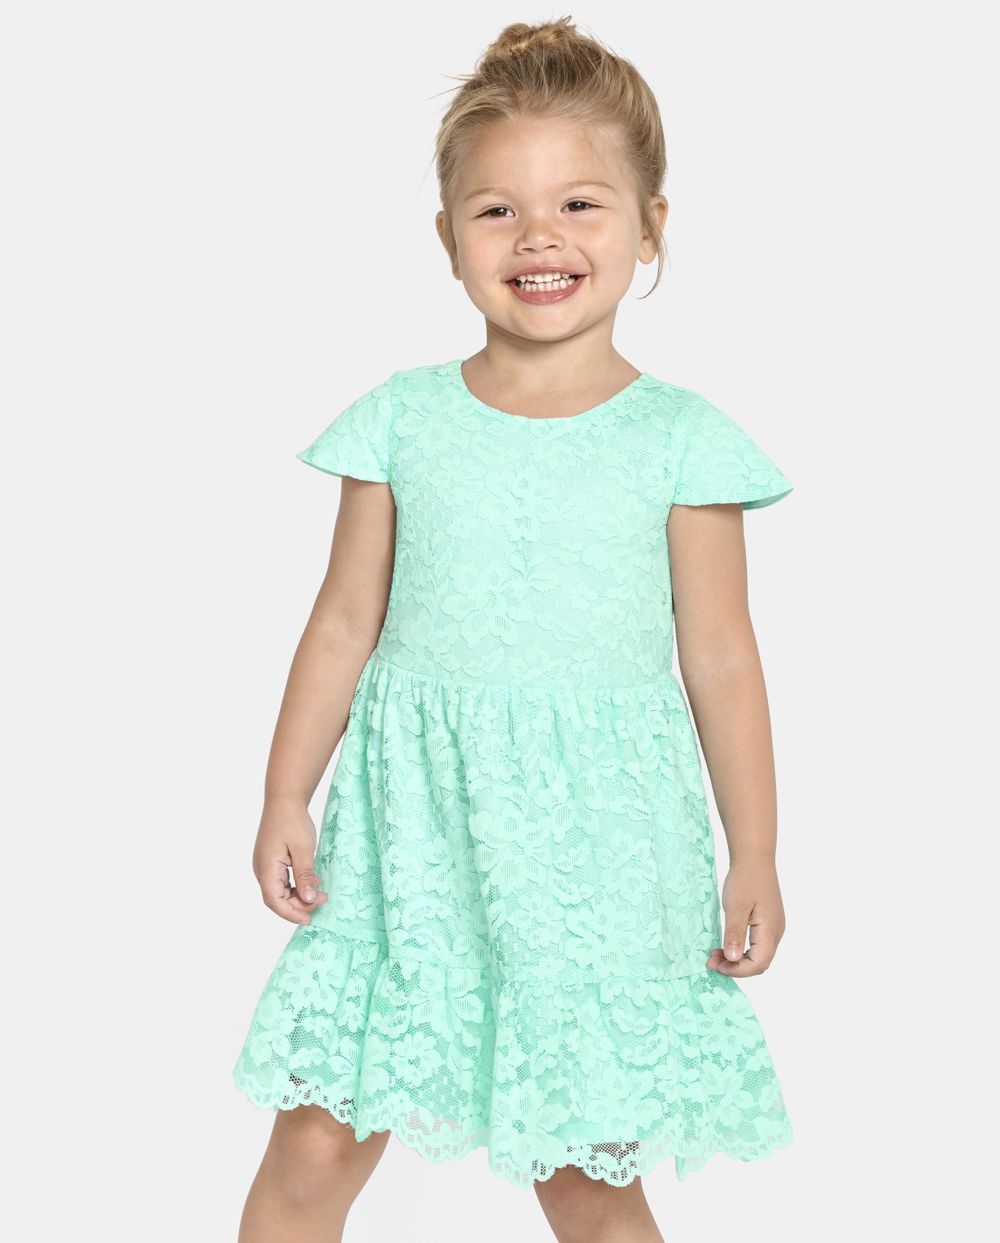 Toddler Cap Short Sleeves Sleeves Crew Neck V Back Above the Knee Dress With Ruffles